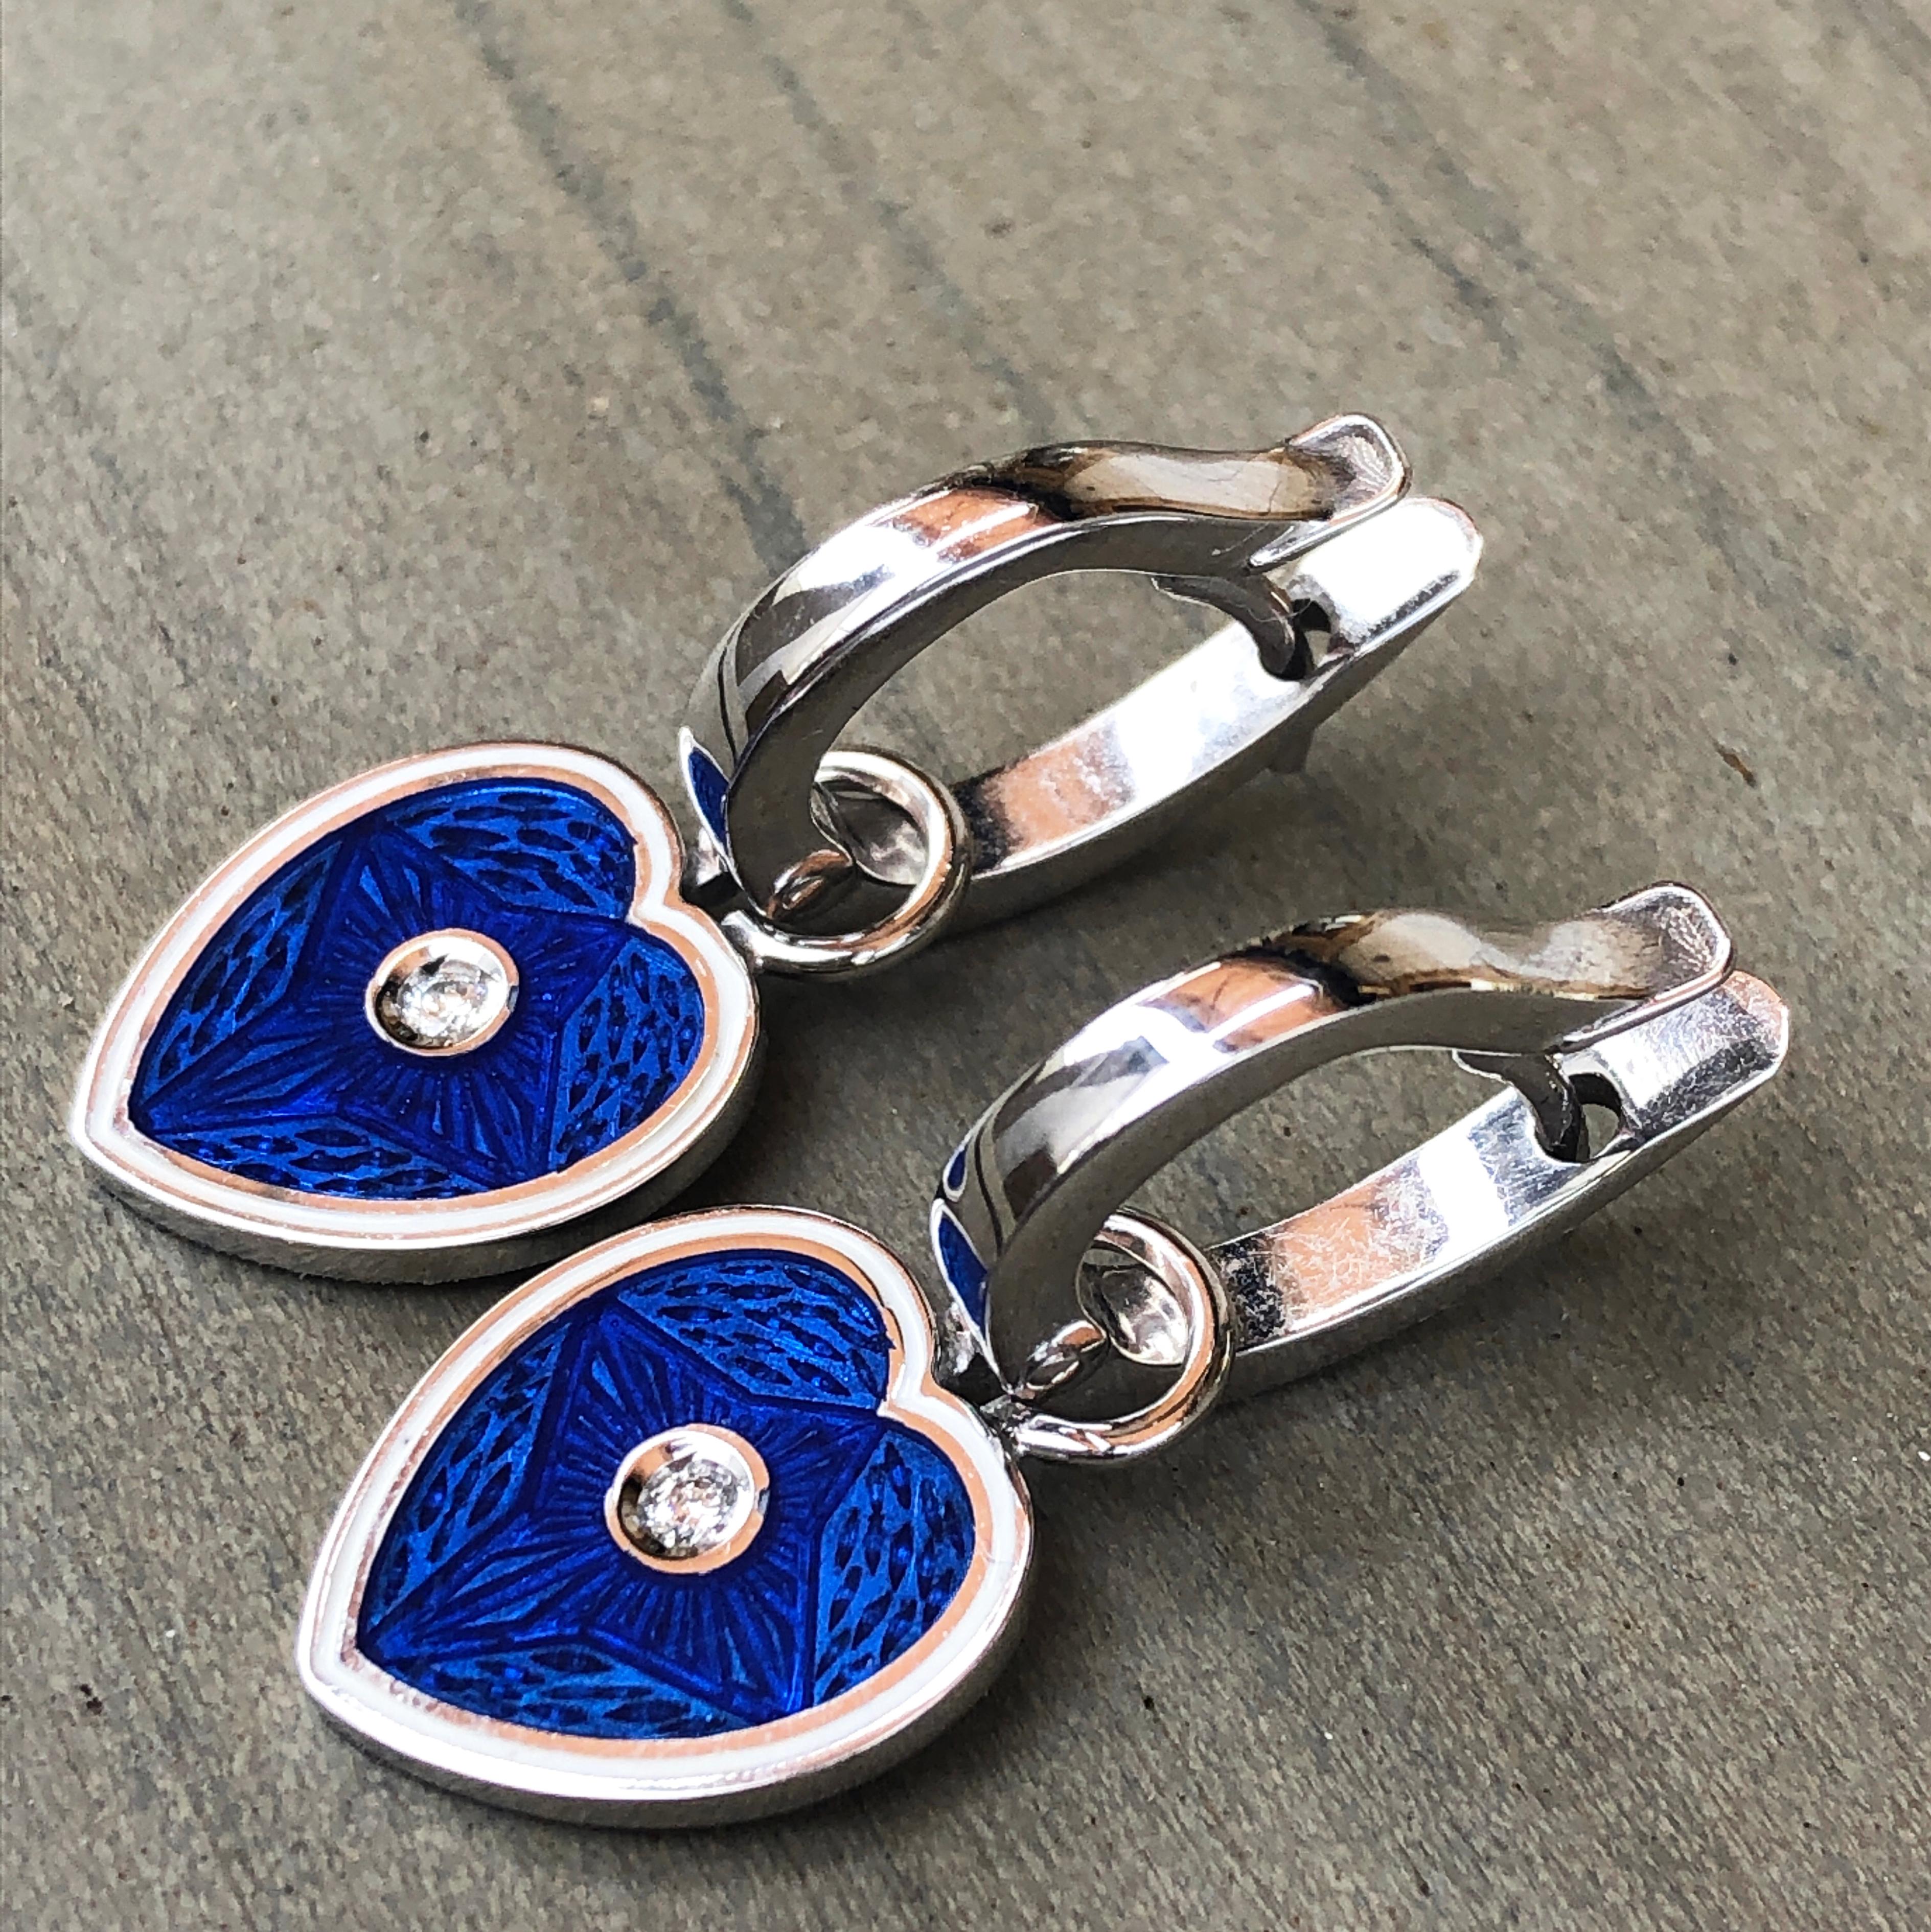 Chic yet timeless 0.07 Carat White Diamond in a White Edged Royal Blue Heart Shaped Removable Pendant in a White Gold Setting.
This brilliant setting allows to wear these lovely earrings both ways.

In our smart Burgundy Lether Box.
A detailed